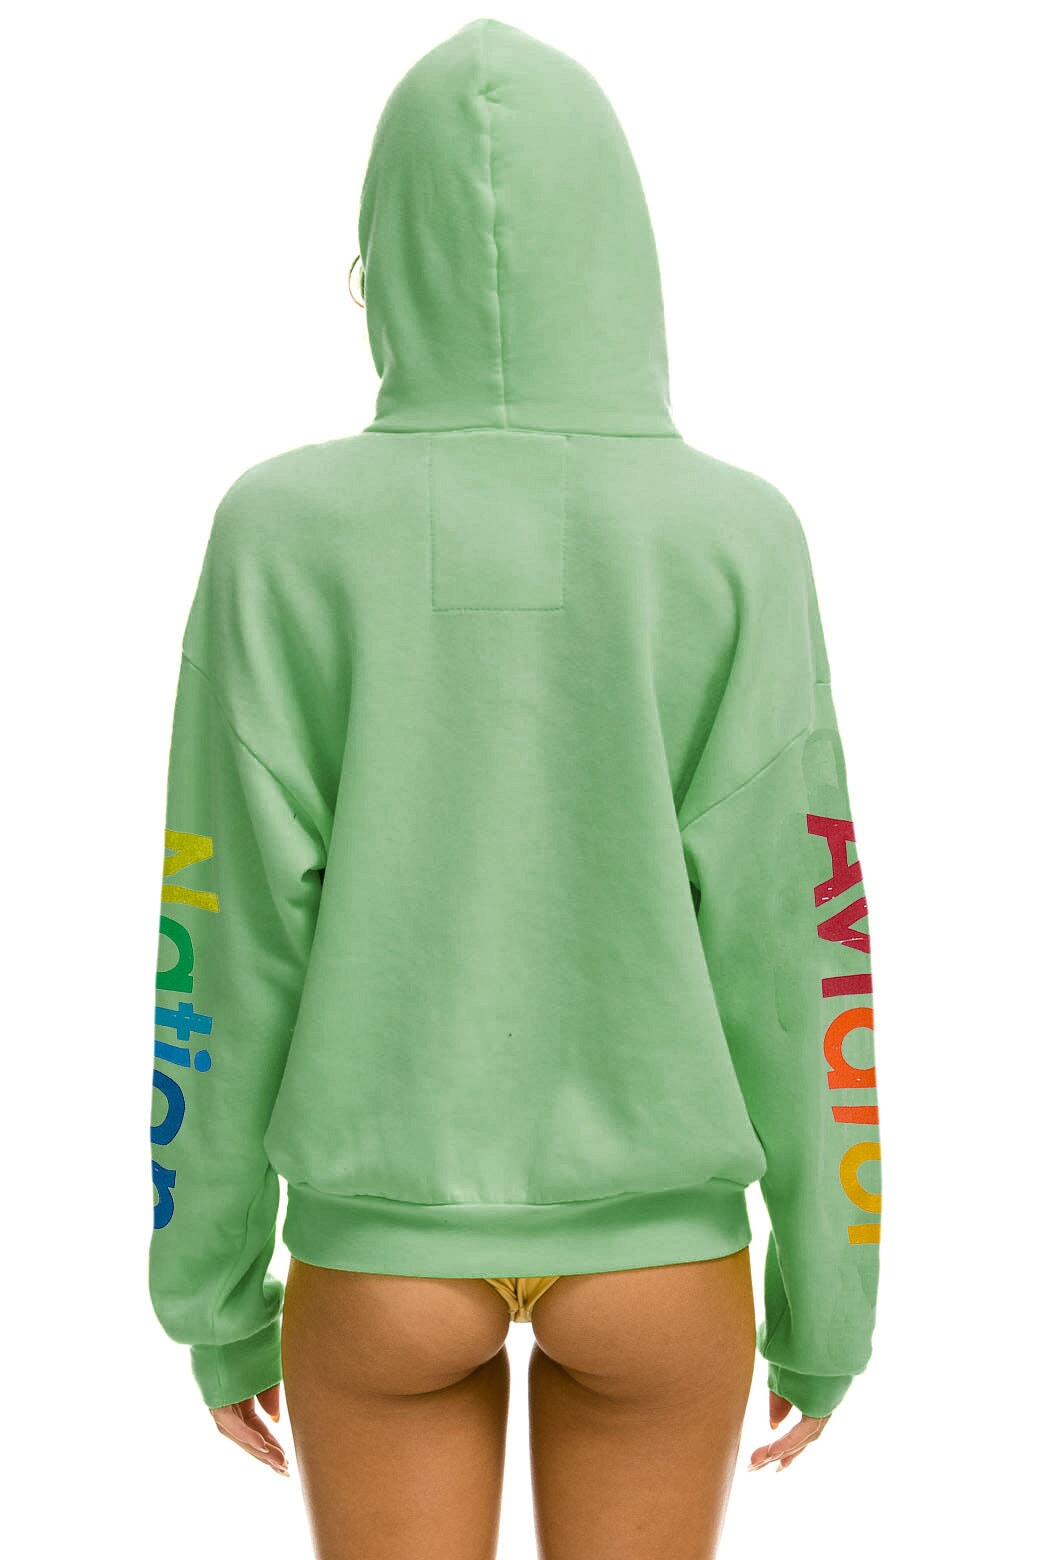 AVIATOR NATION ASPEN RELAXED PULLOVER HOODIE - MINT Hoodie Aviator Nation 